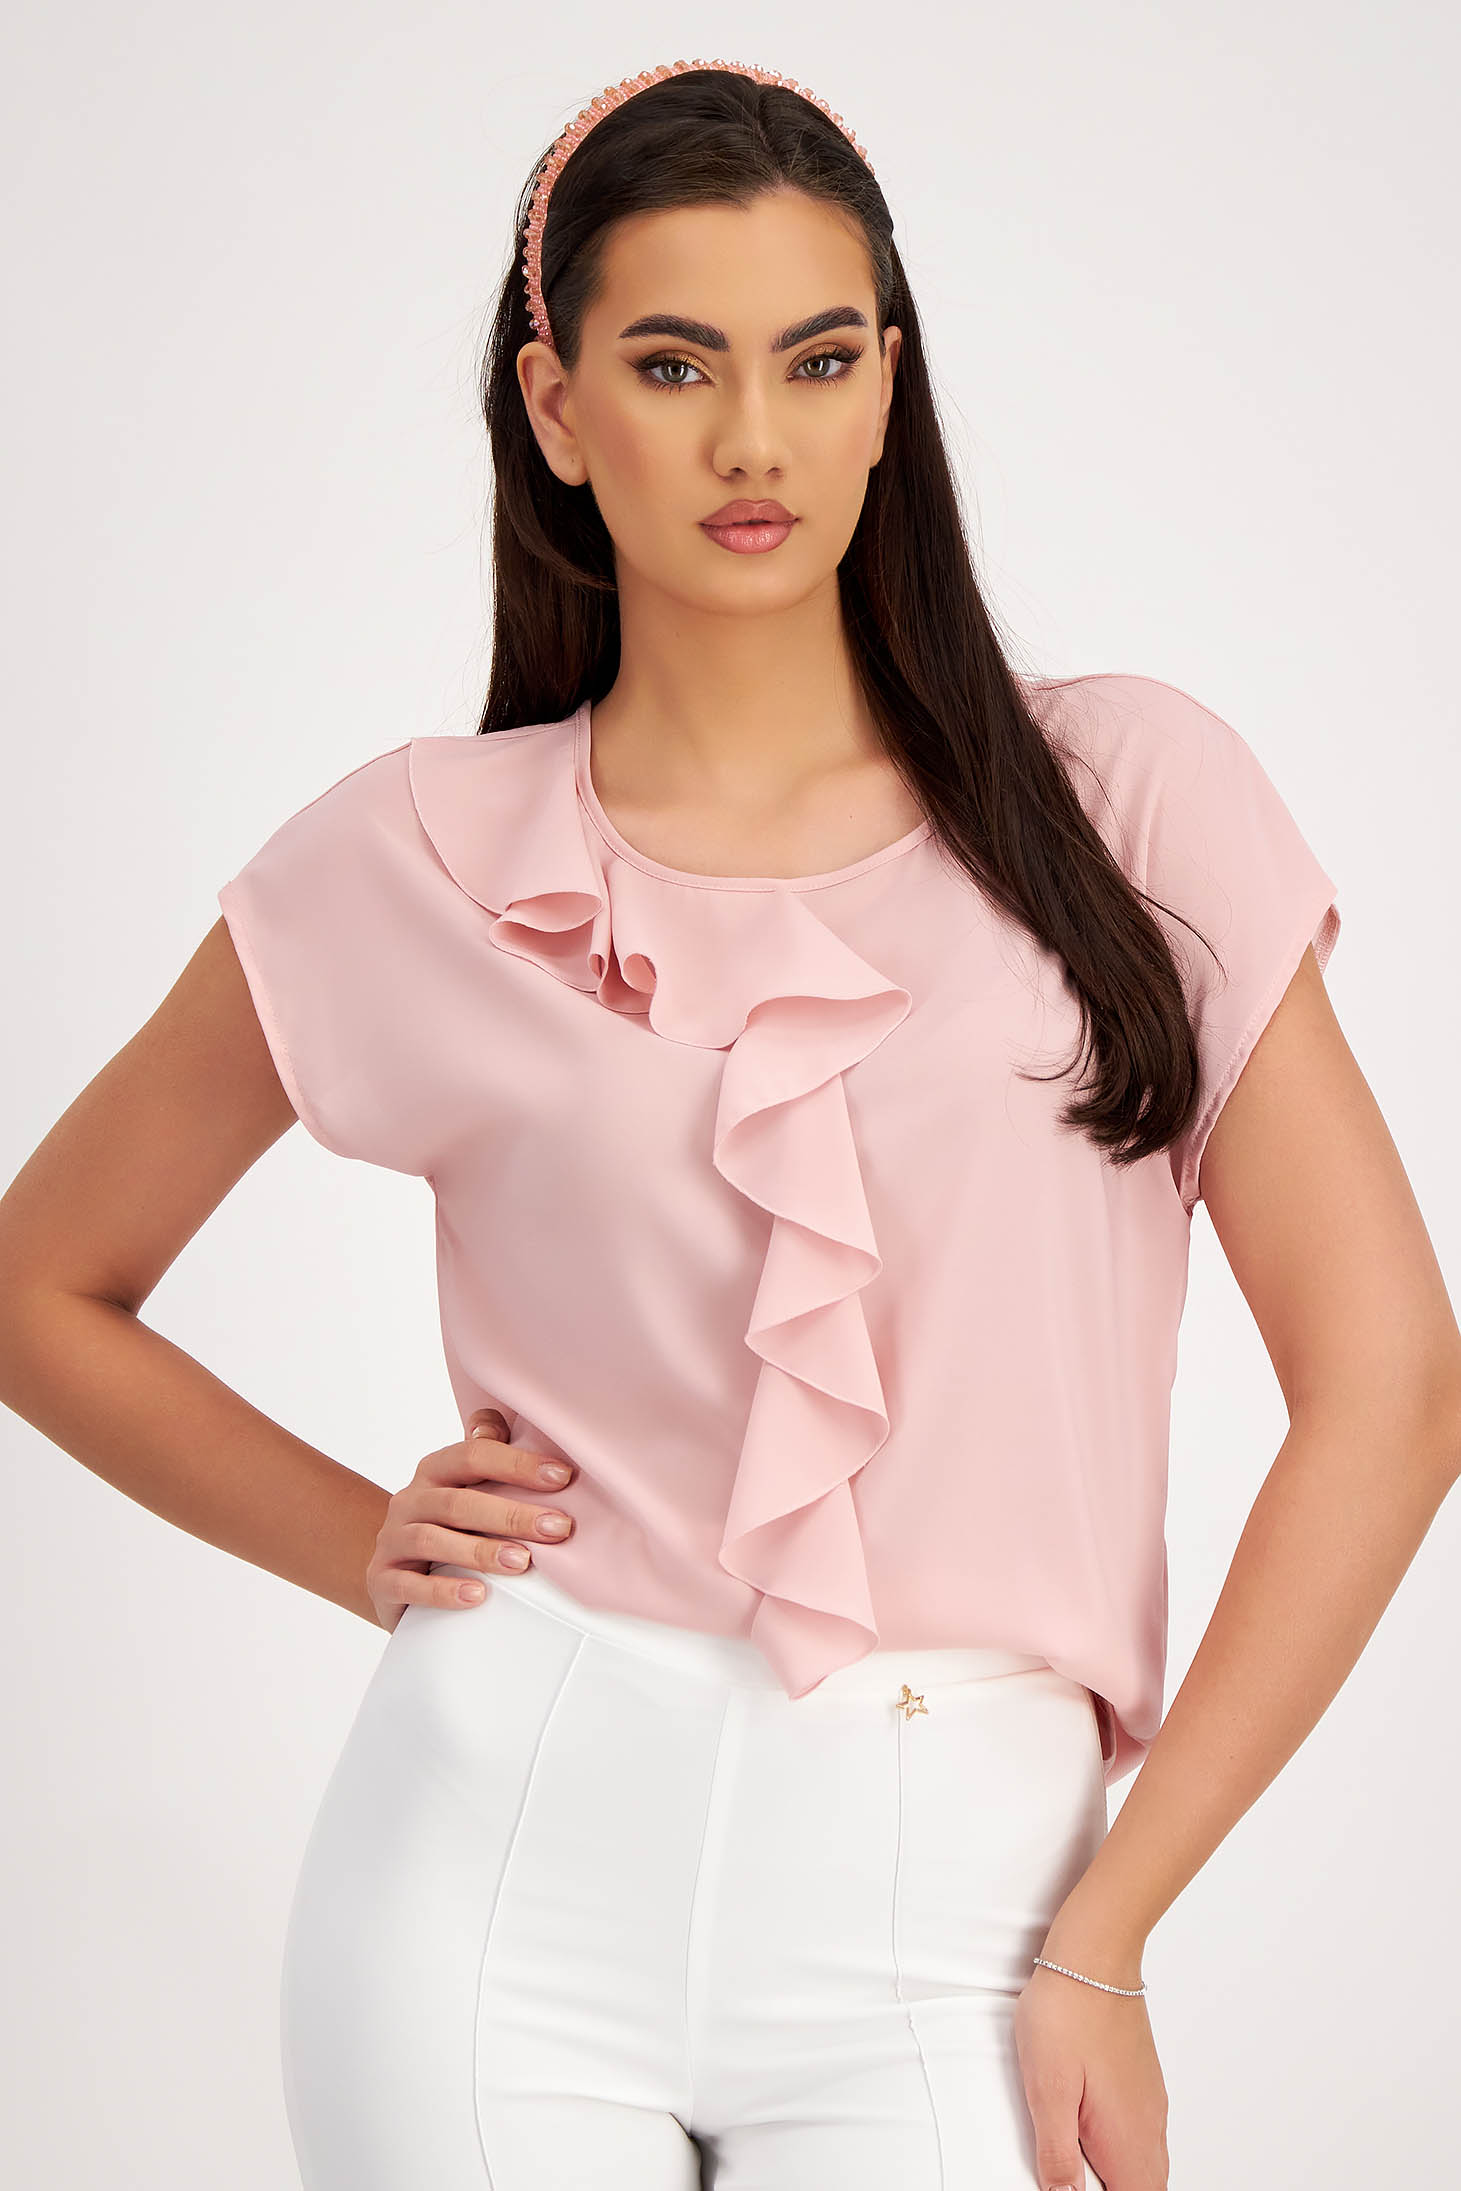 Light Pink Voile Women's Blouse with Wide Cut and Asymmetrical Front Frill - StarShinerS 6 - StarShinerS.com